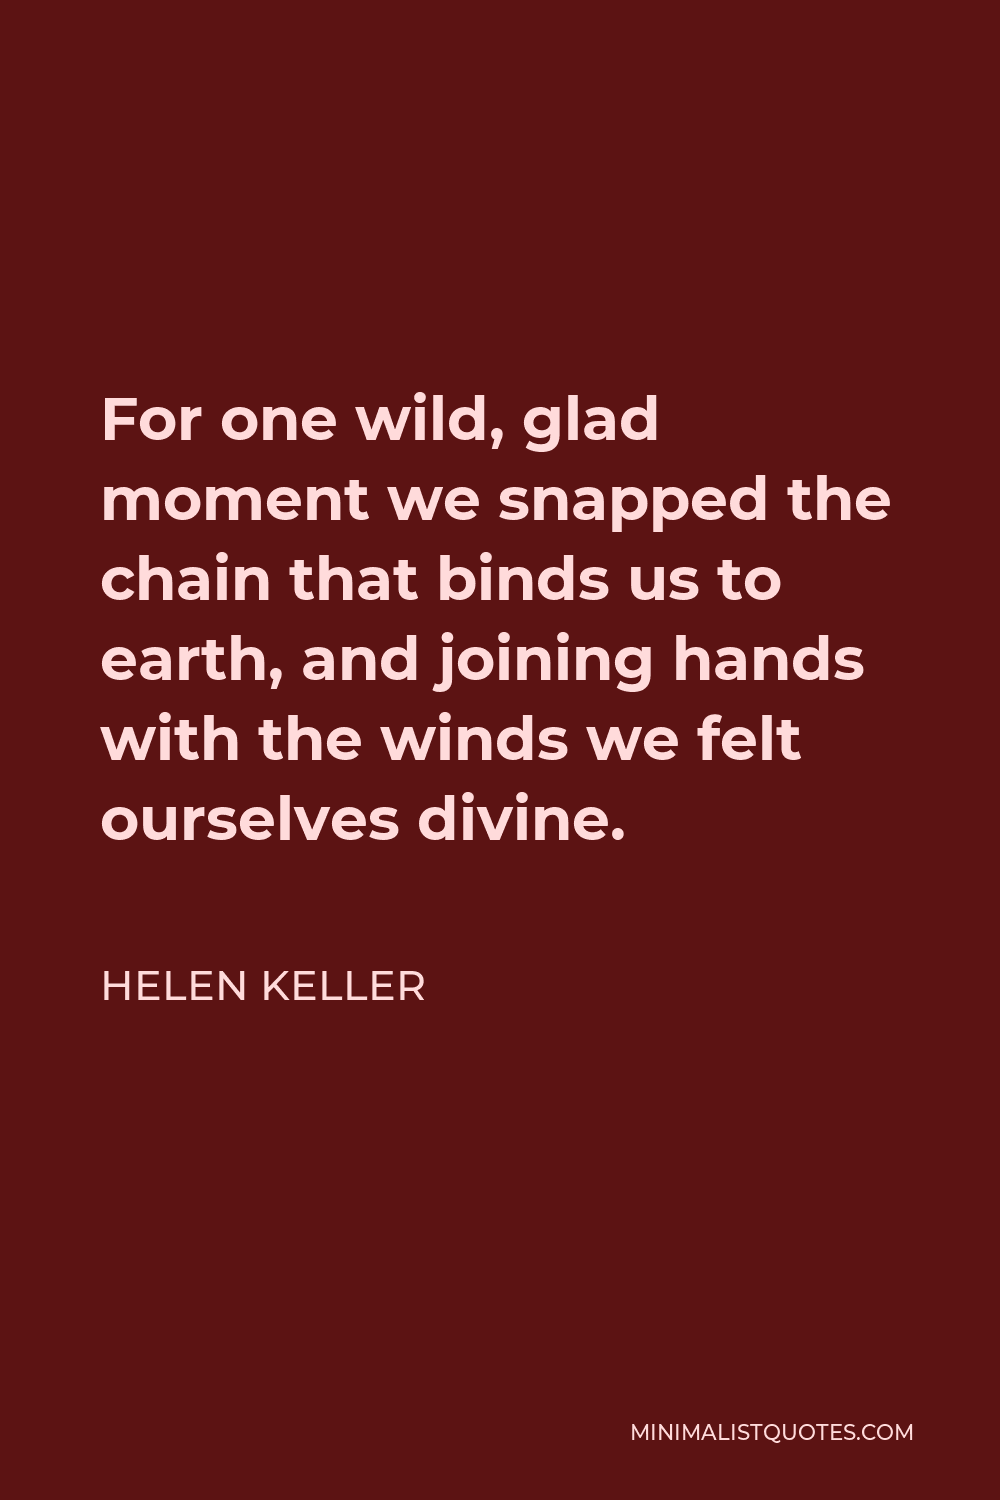 Helen Keller Quote - For one wild, glad moment we snapped the chain that binds us to earth, and joining hands with the winds we felt ourselves divine.